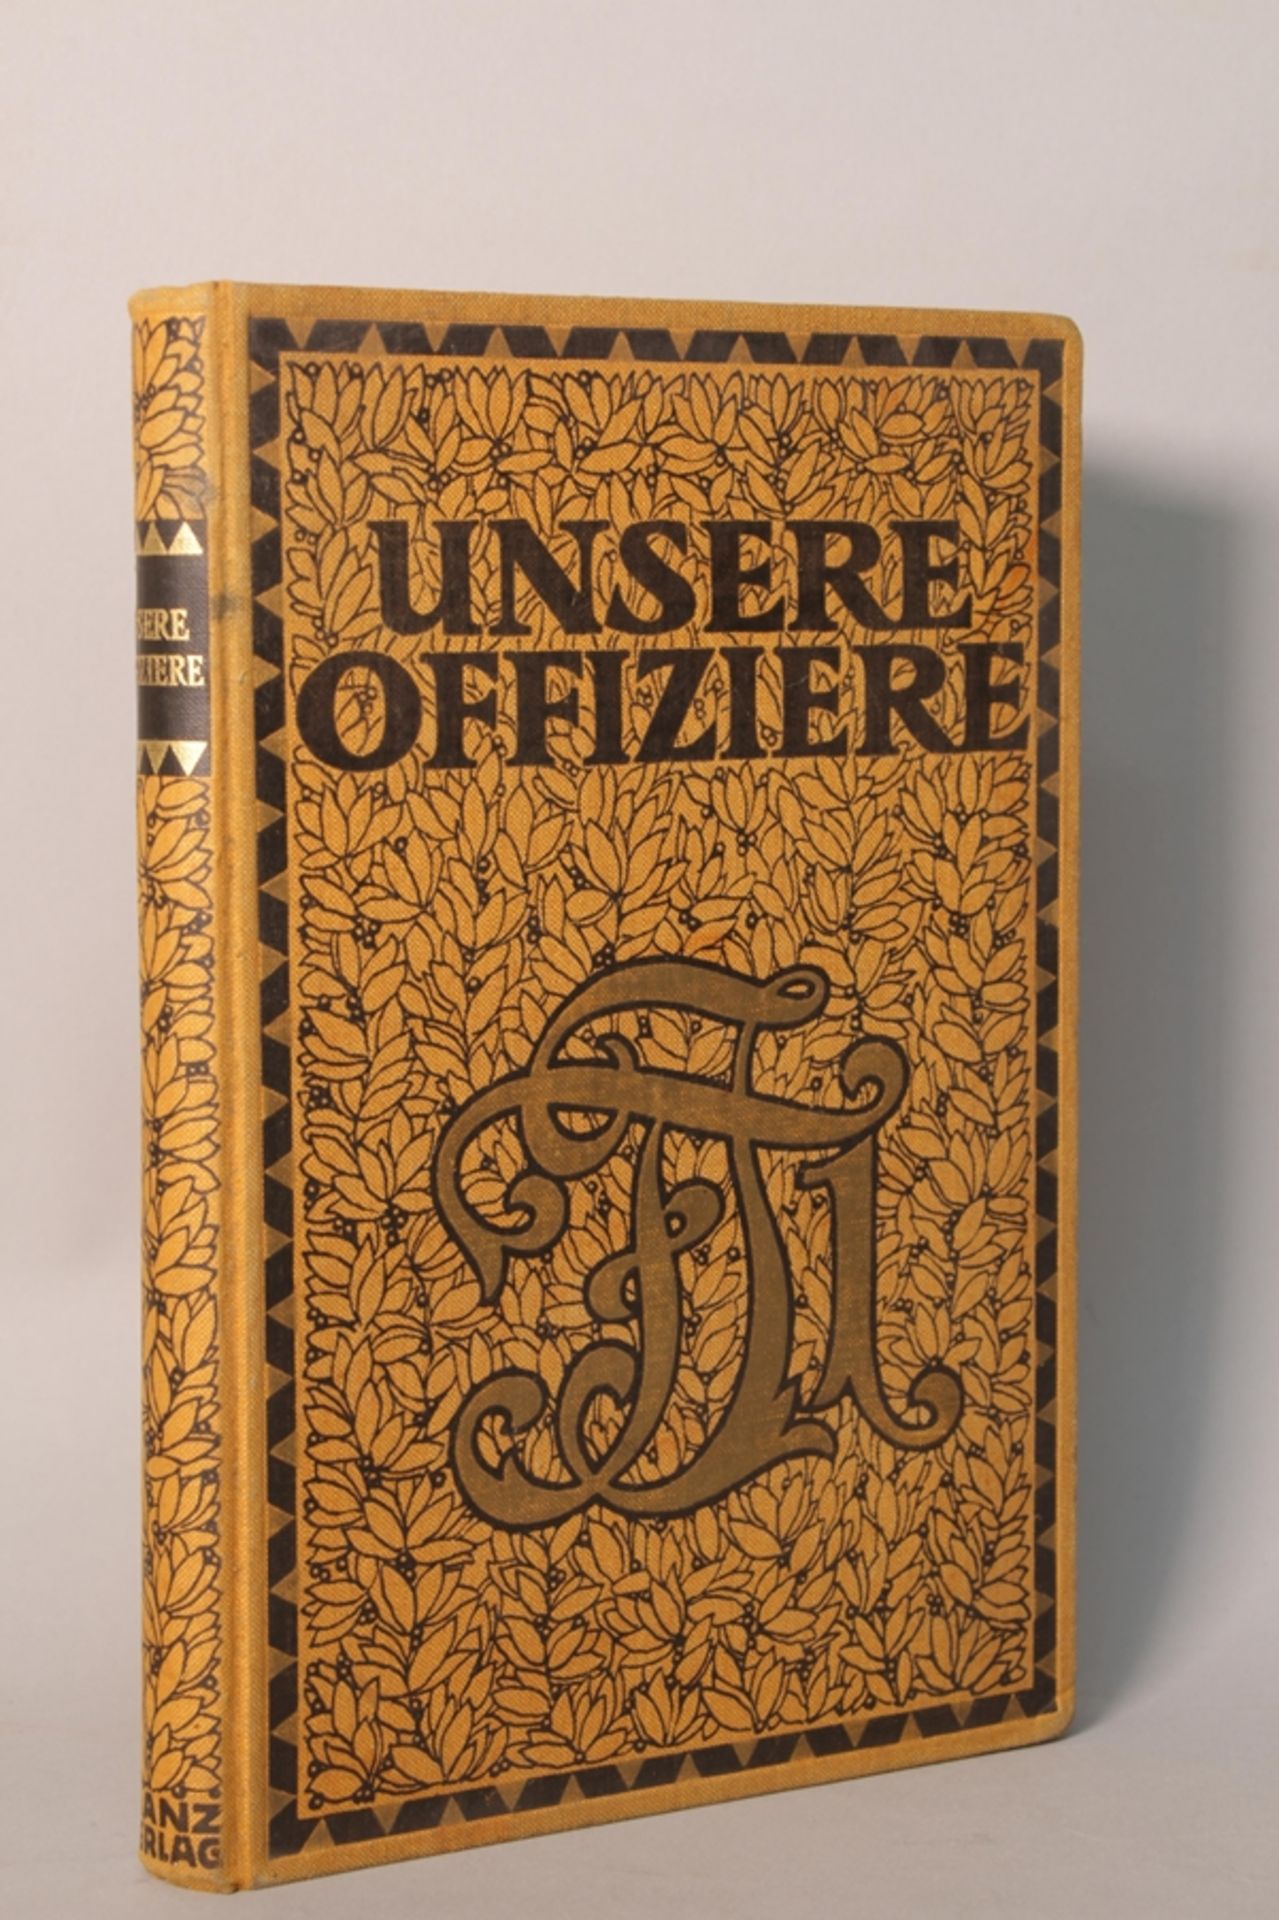 Unsere Offiziere